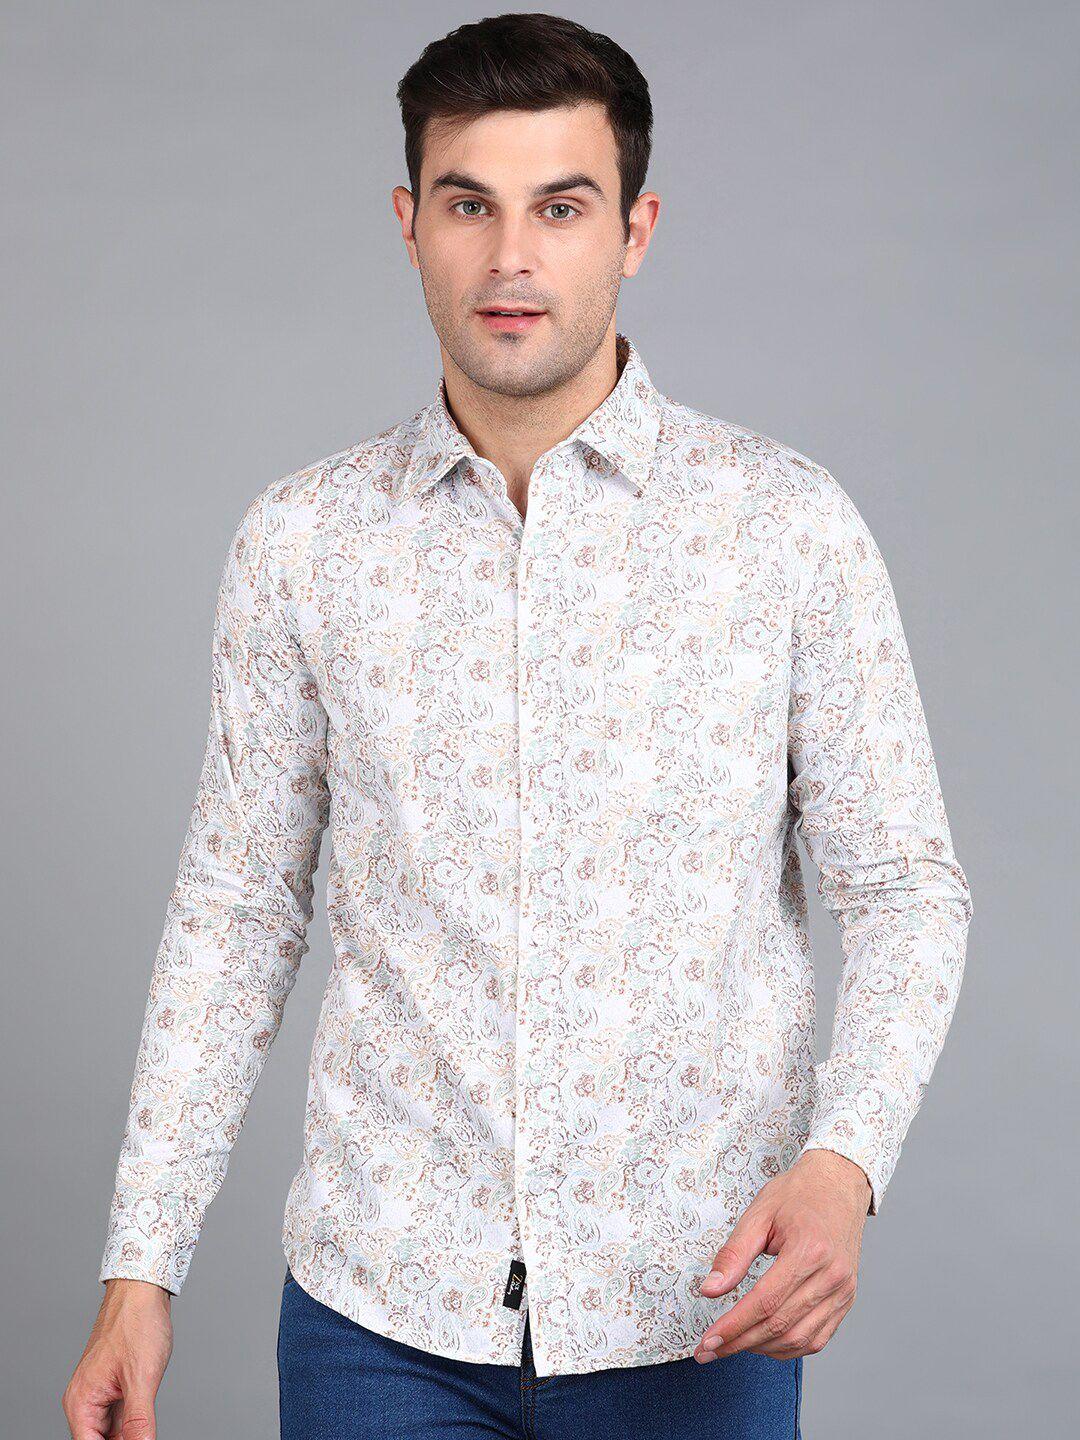 znx-clothing-men-off-white-premium-floral-opaque-printed-formal-shirt